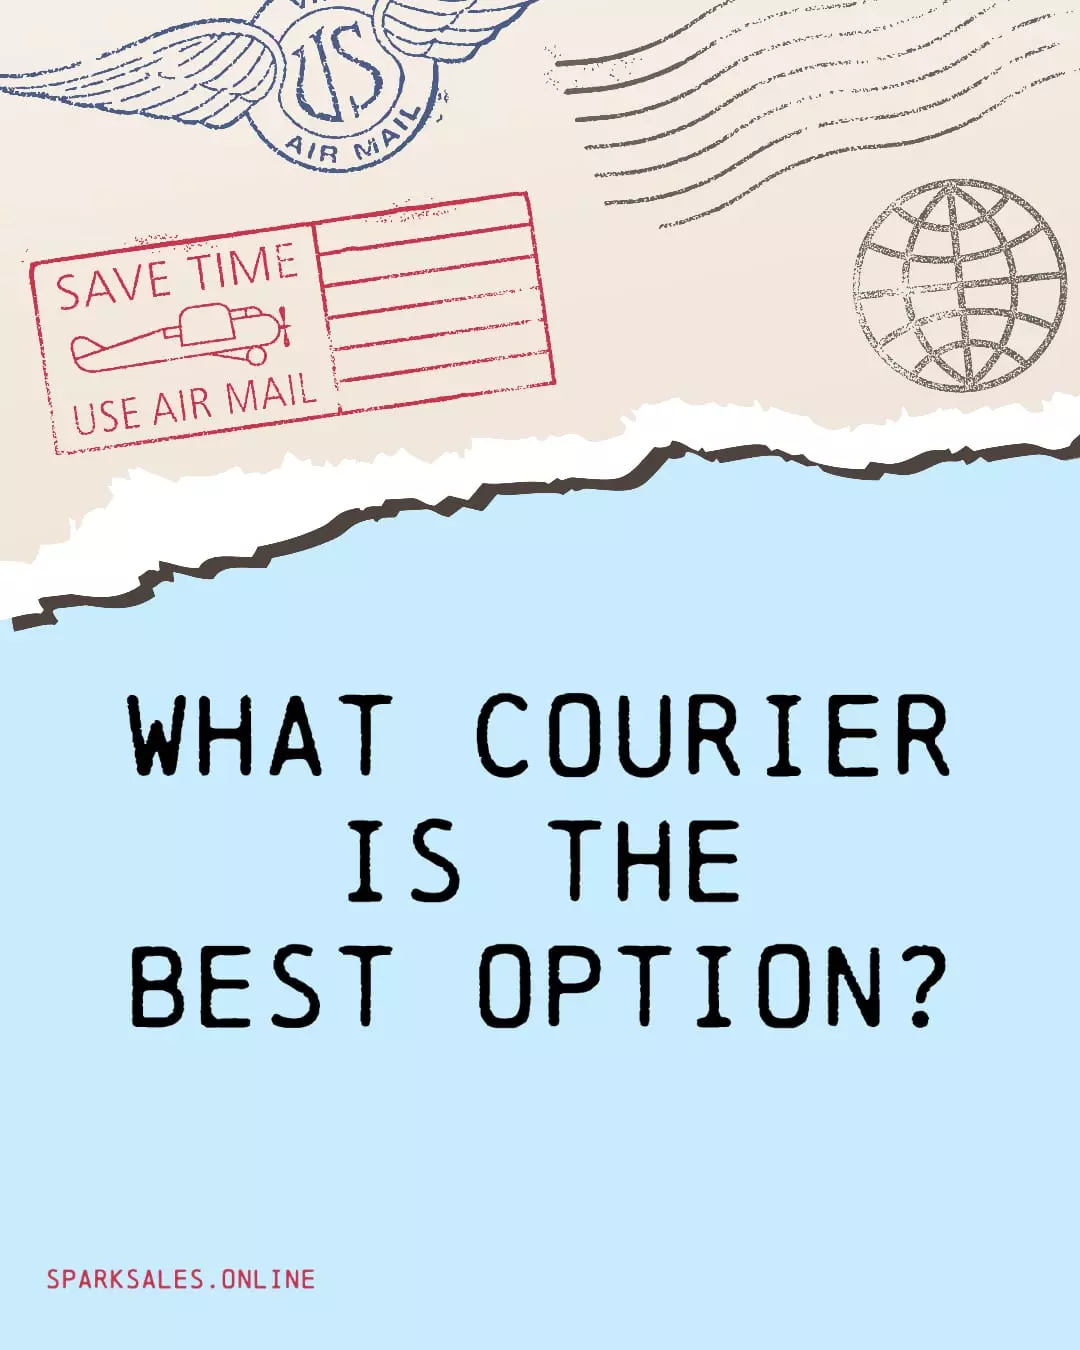 What courier is the best option?